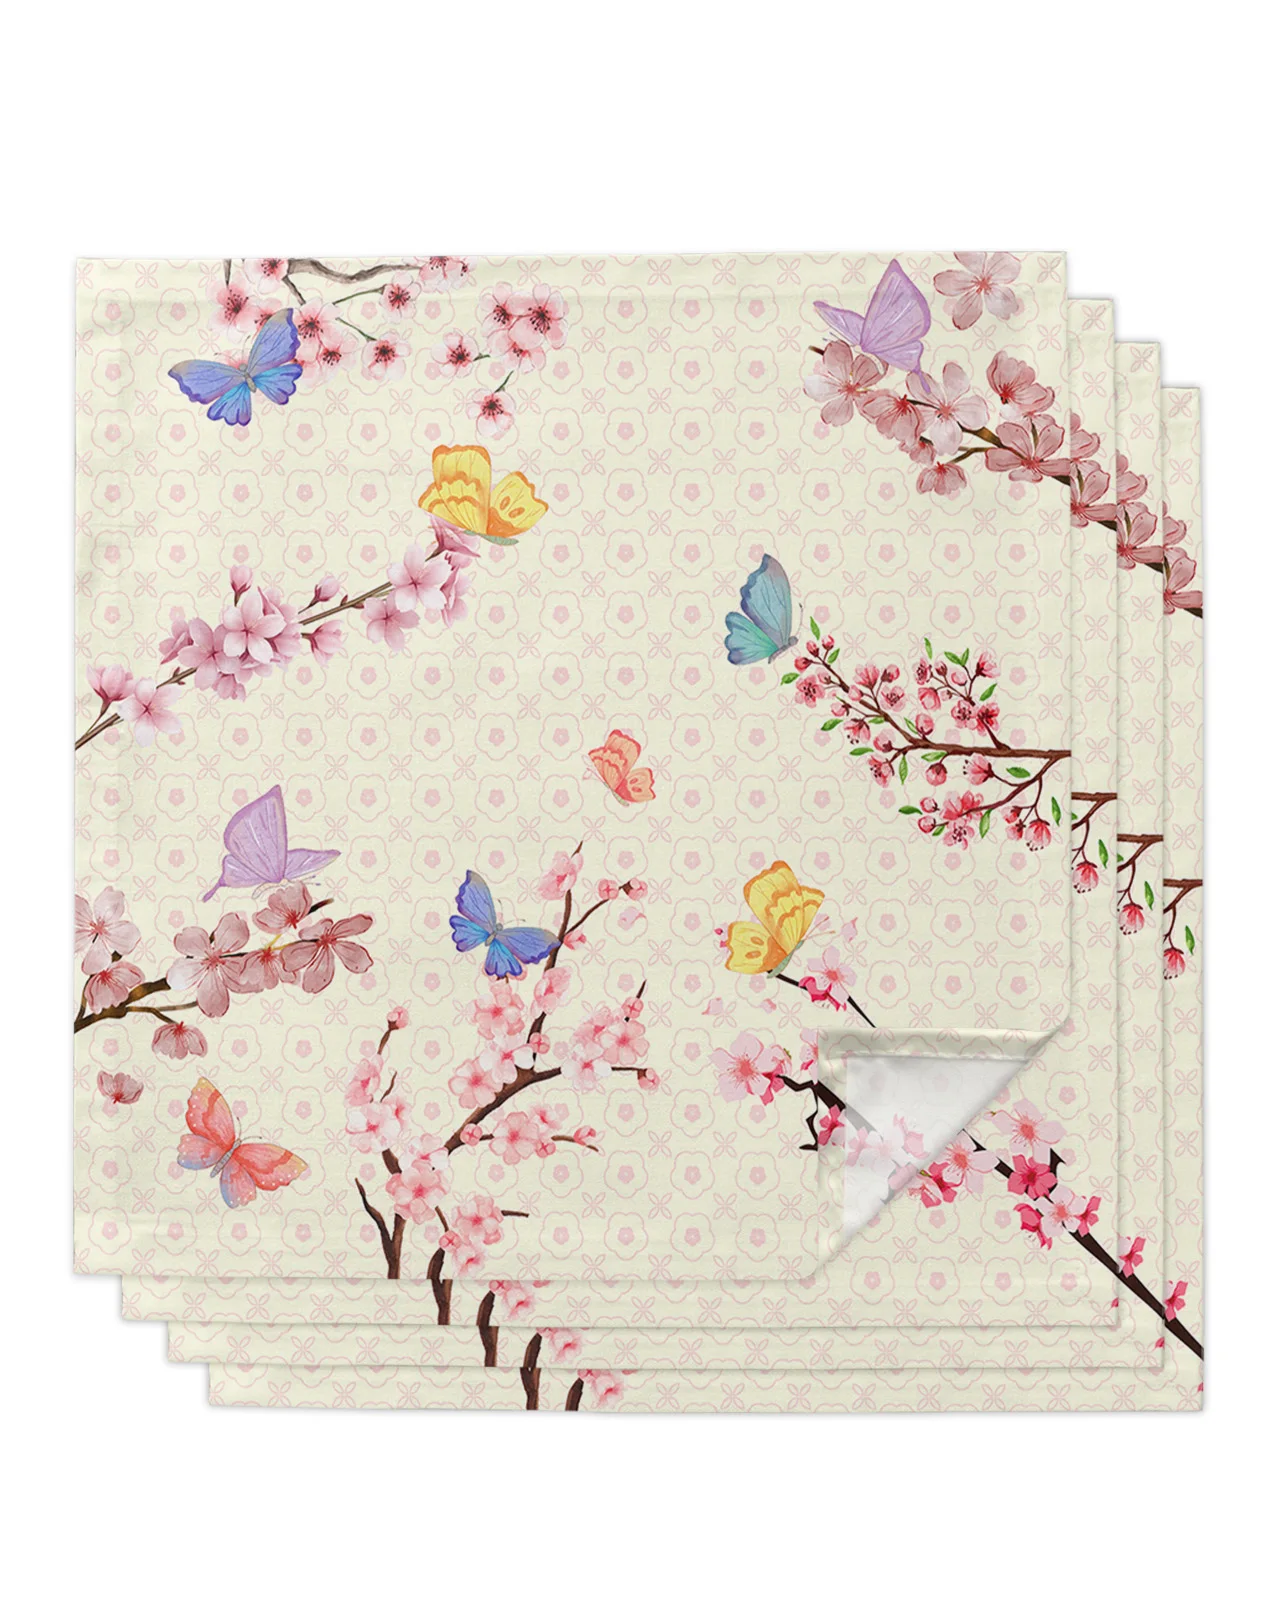 

4pcs Butterfly Cherry Blossom Plum Square 50cm Table Napkin Party Wedding Decoration Table Cloth Kitchen Dinner Serving Napkins